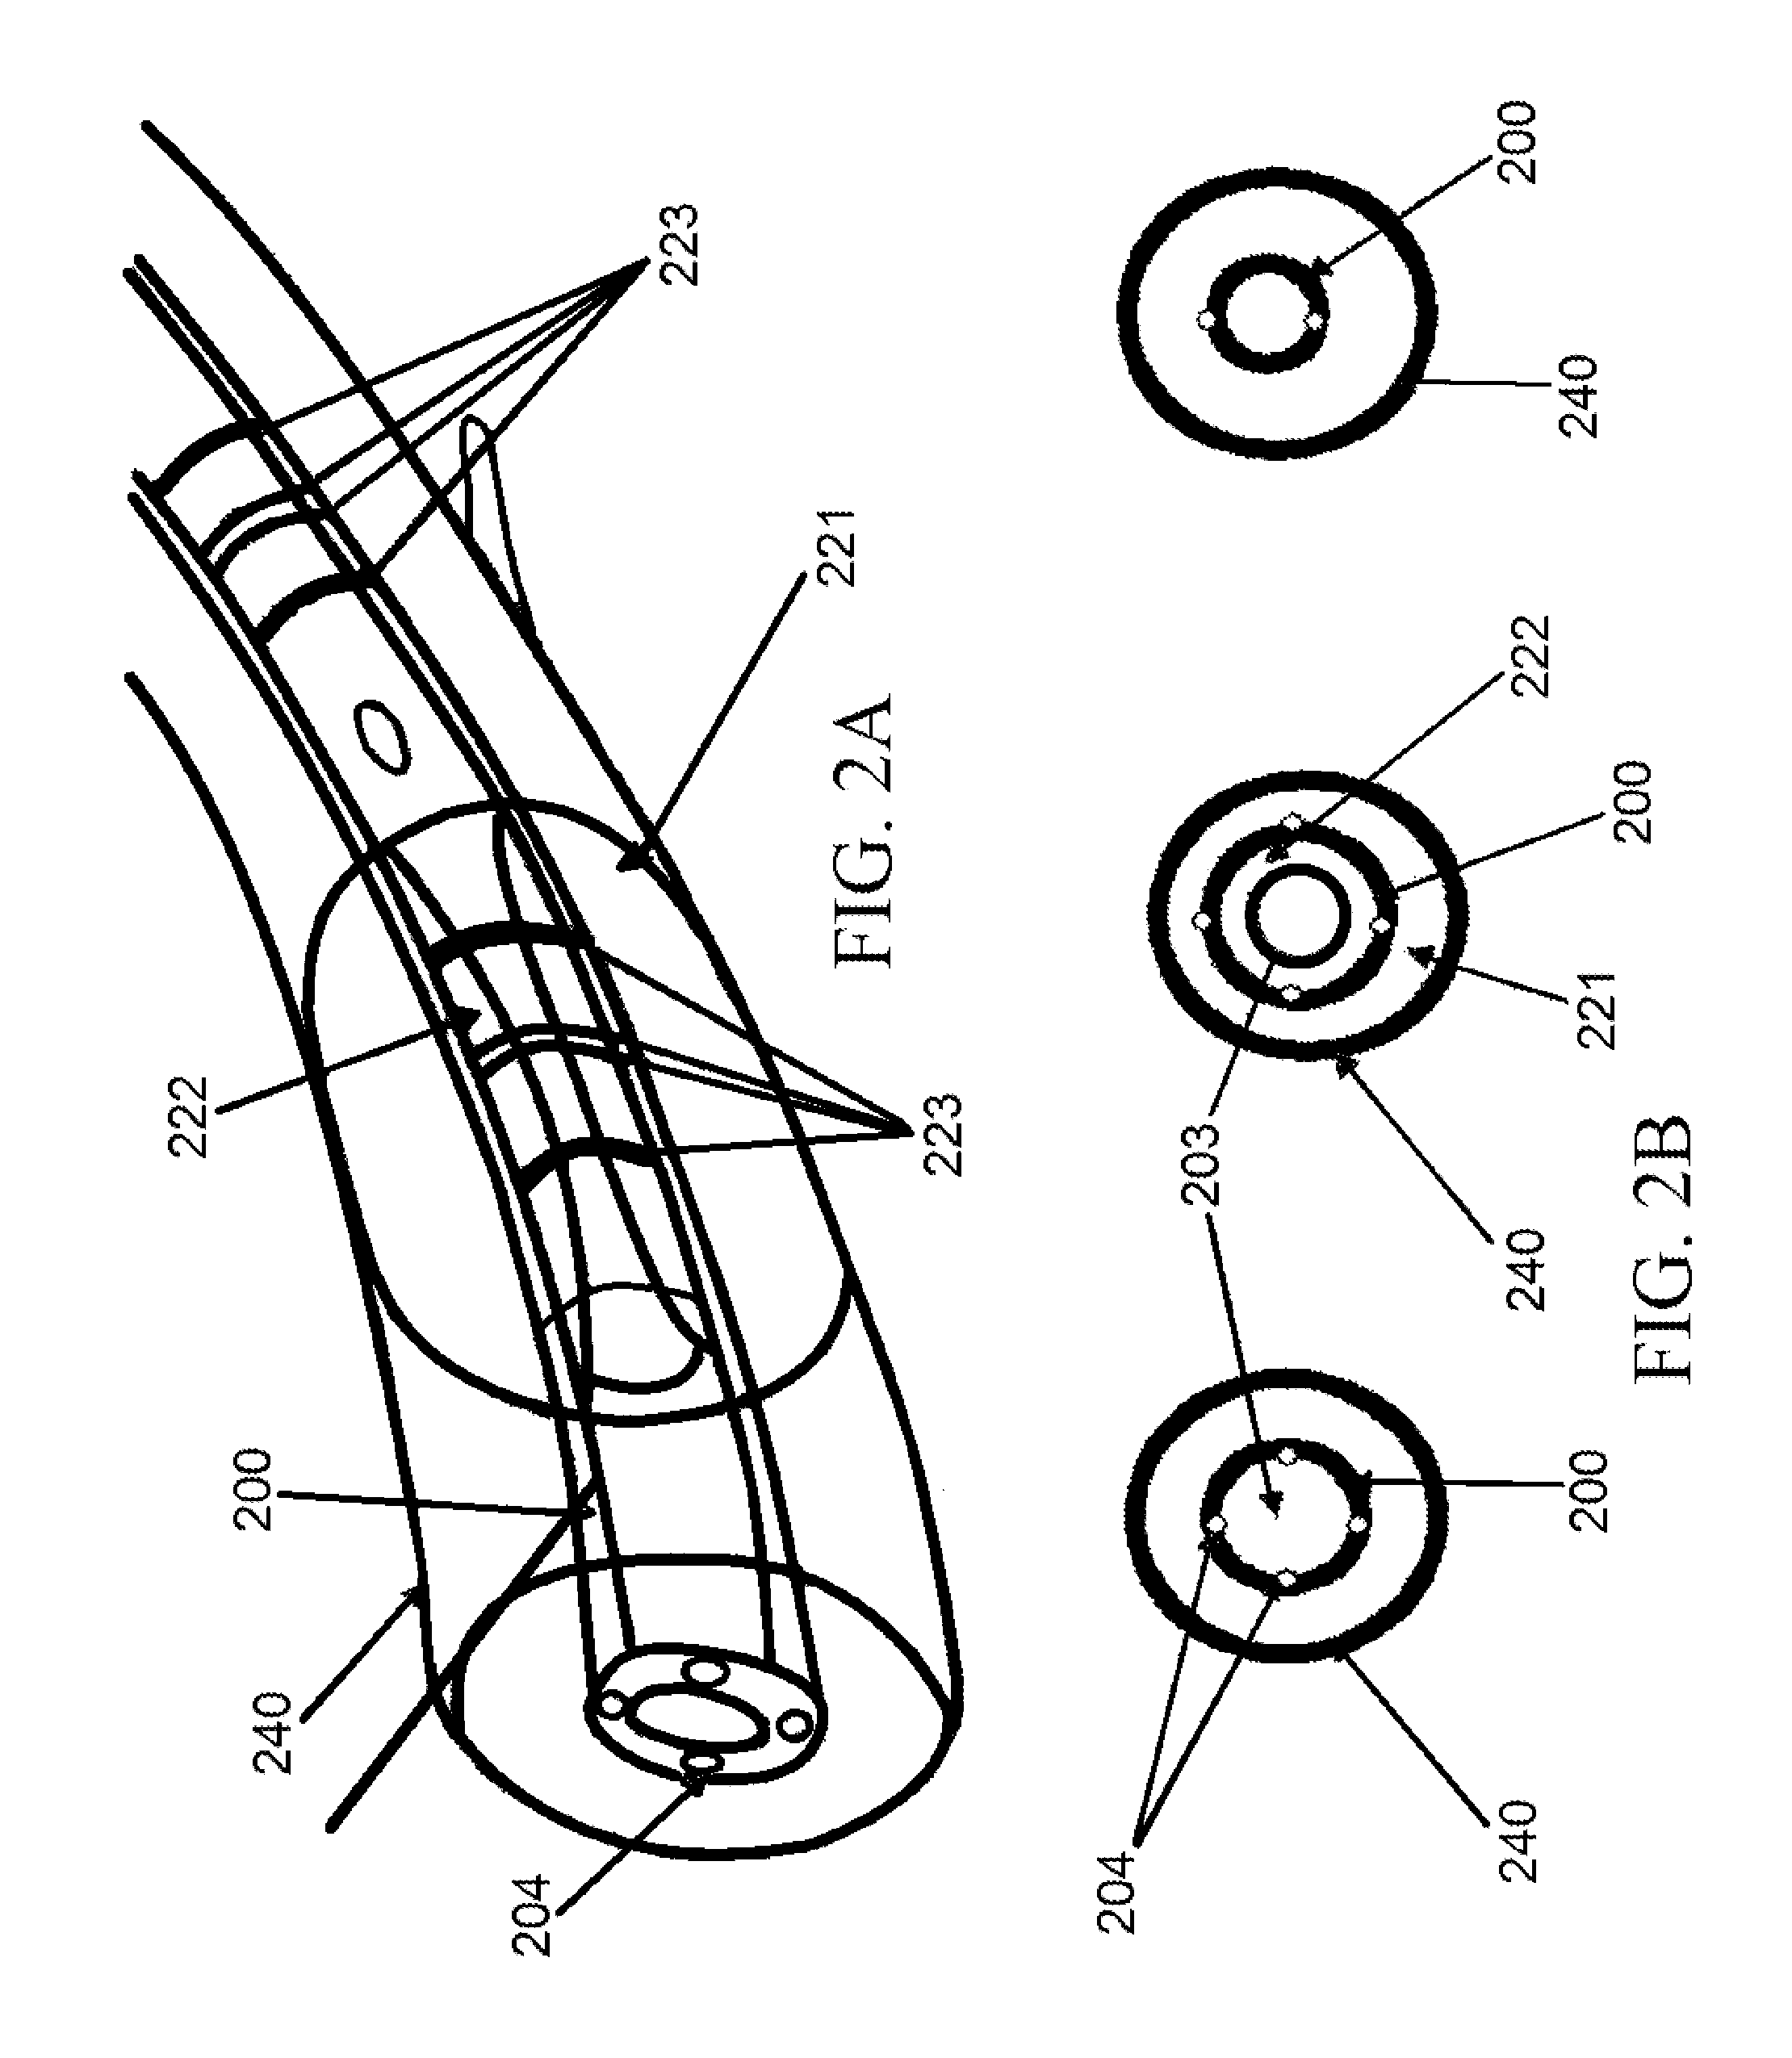 Device and methods for controlling blood perfusion pressure using a retrograde cannula